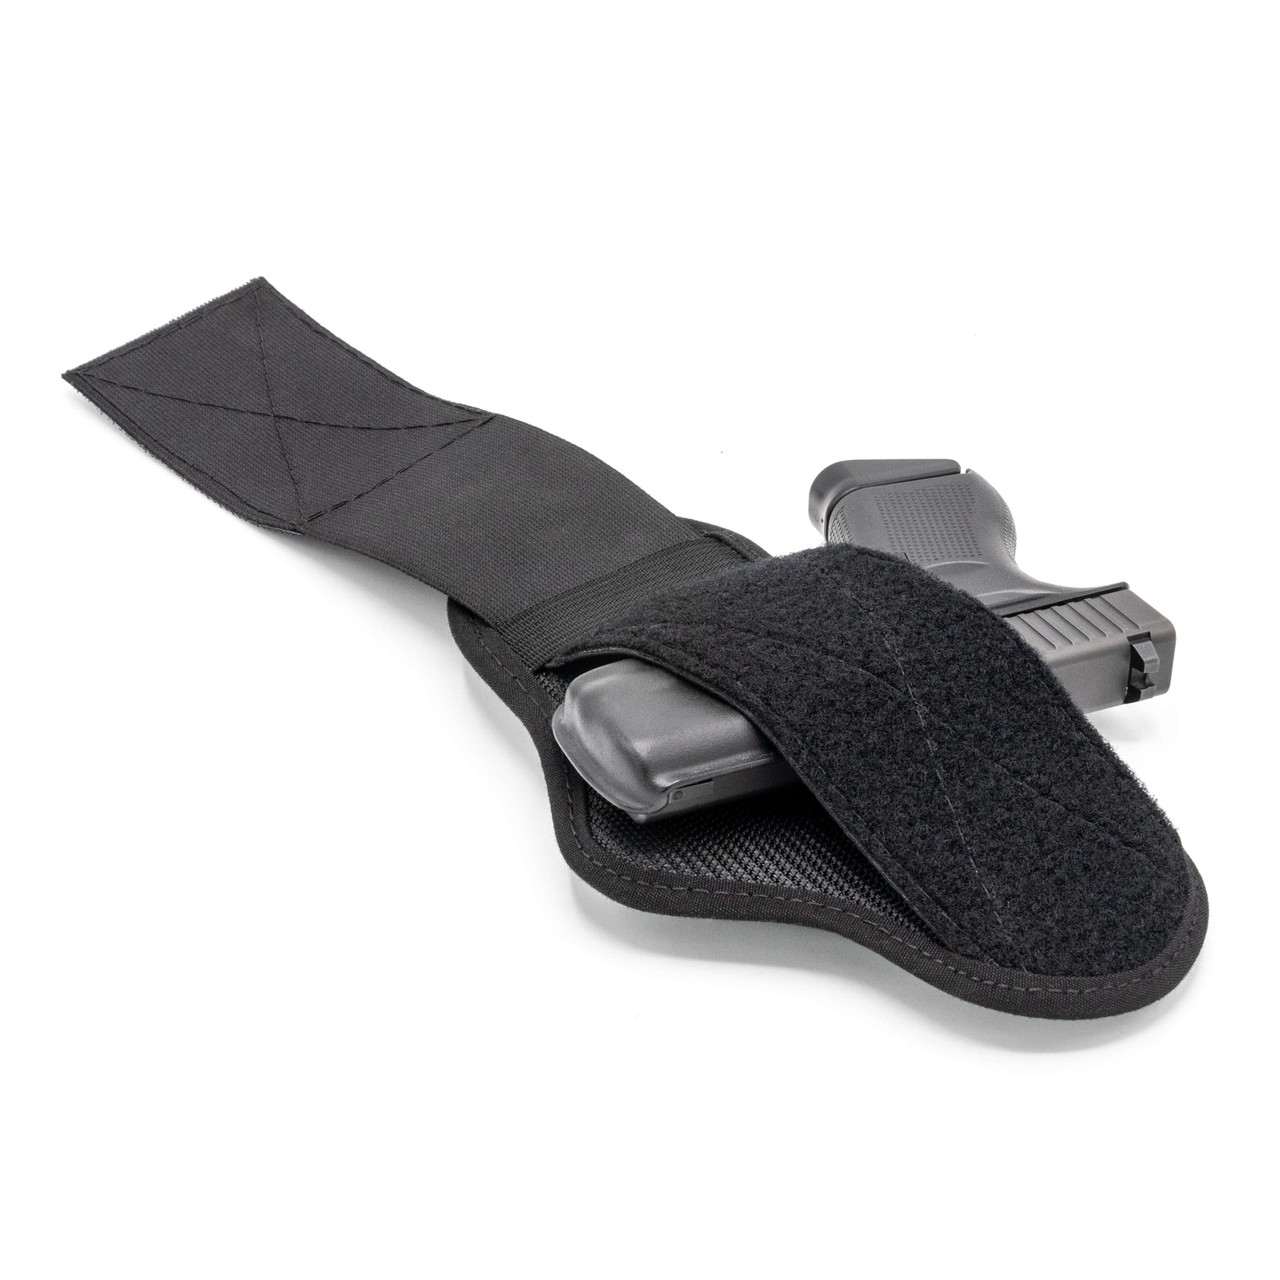 StealthGearUSA Ventcore Belly and Thigh Holster - StealthGearUSA